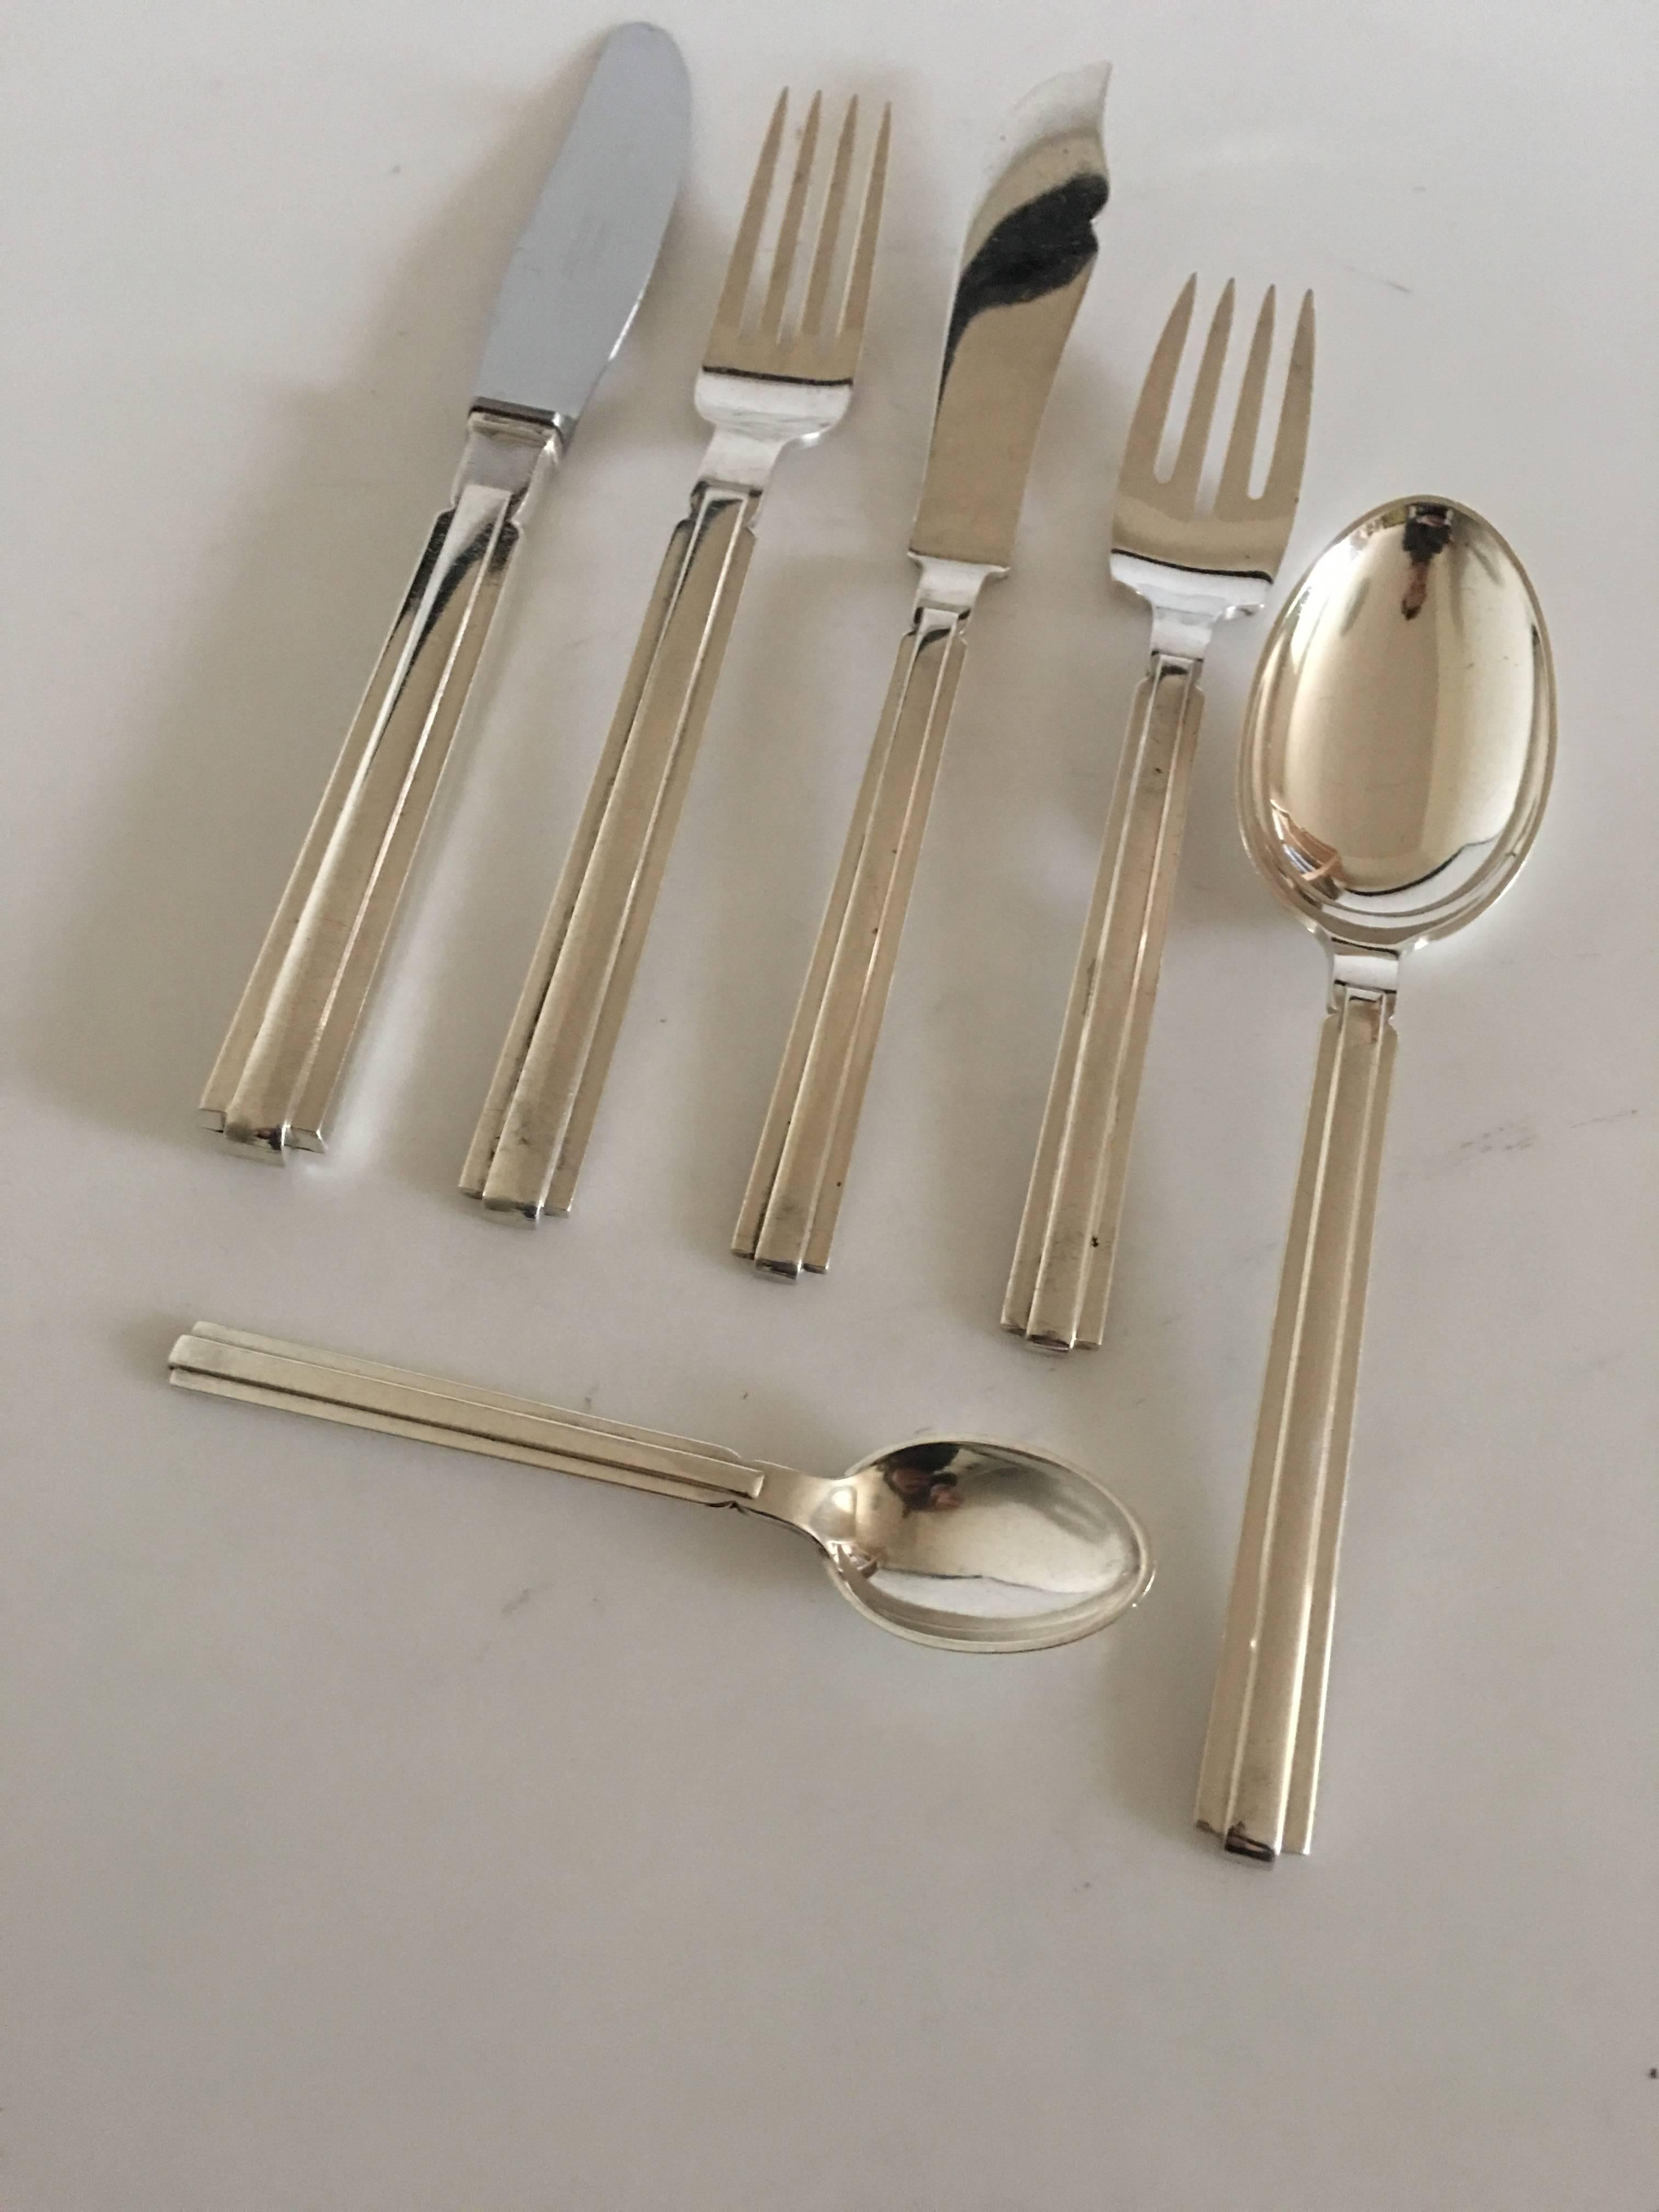 Hans Hansen Arvesølv No. 18 flatware set for eight People. 48 pieces in sterling silver. The set consists of the following items; 

Eight dinner knives 22 cm L (8 21/32